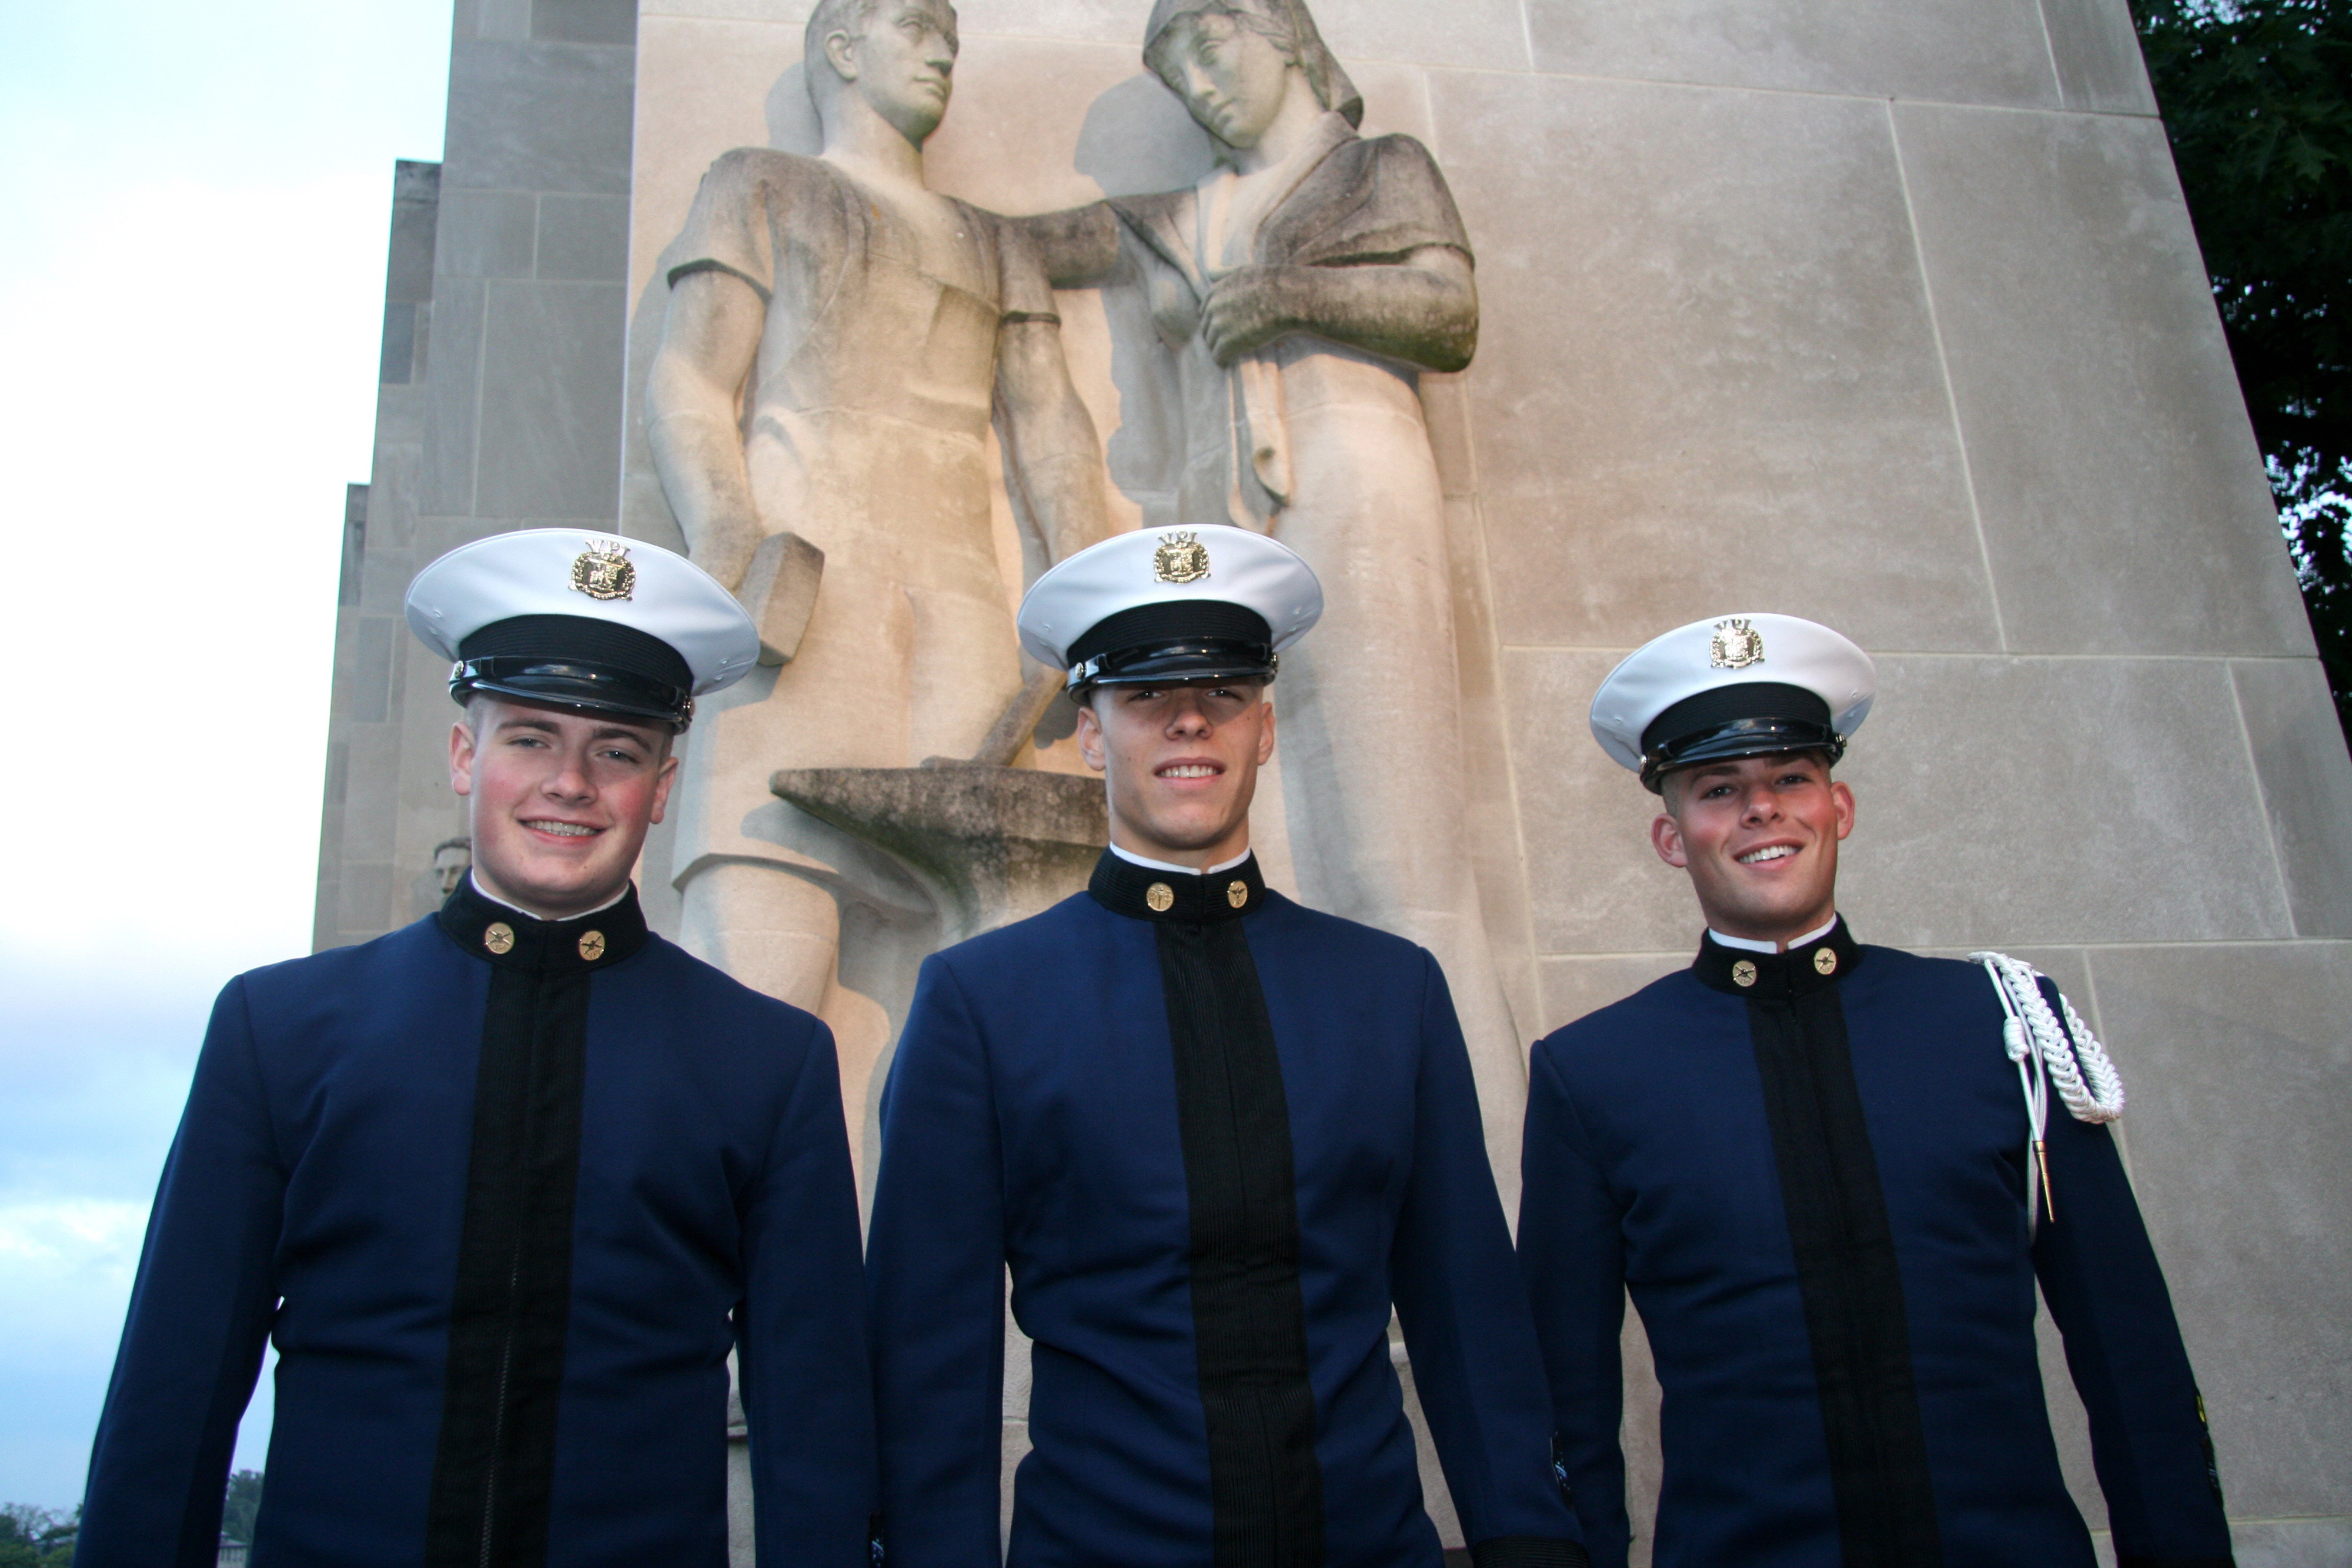 From left to right are Cadets Brendan Blawie, Ian Marble, and Alexander Zuchowicz